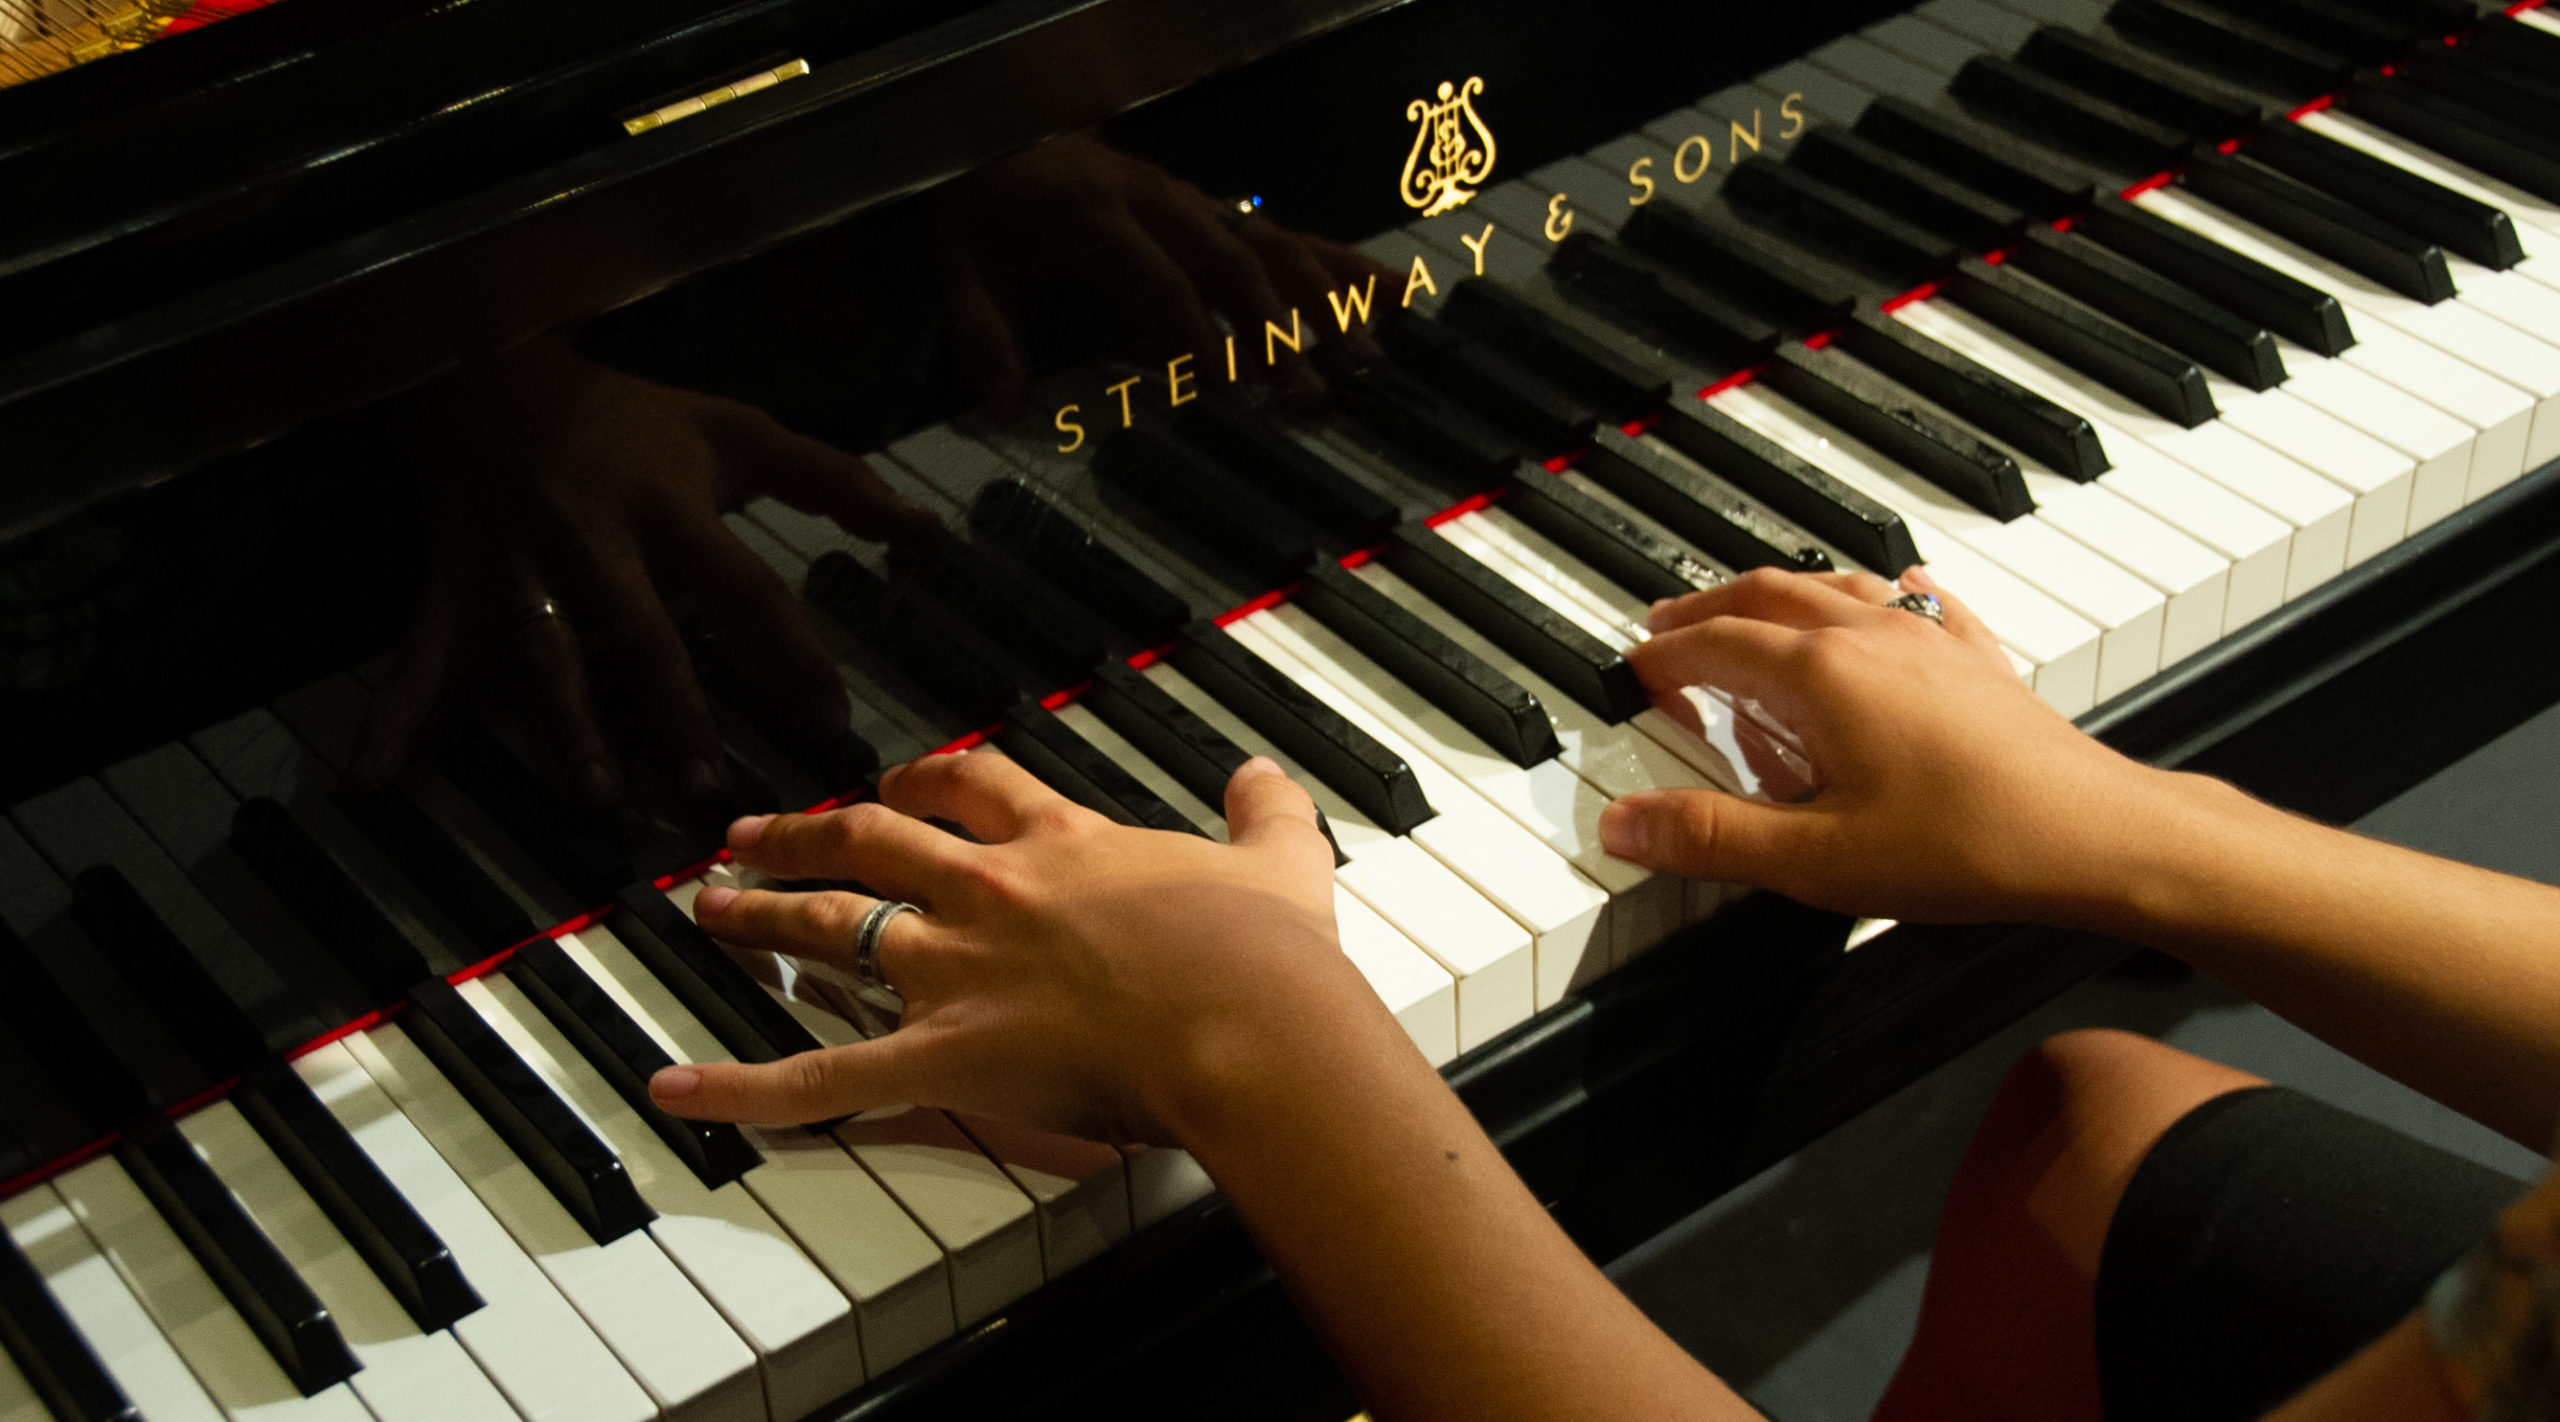 Close-up shot of hands playing a Steinway & Sons piano.